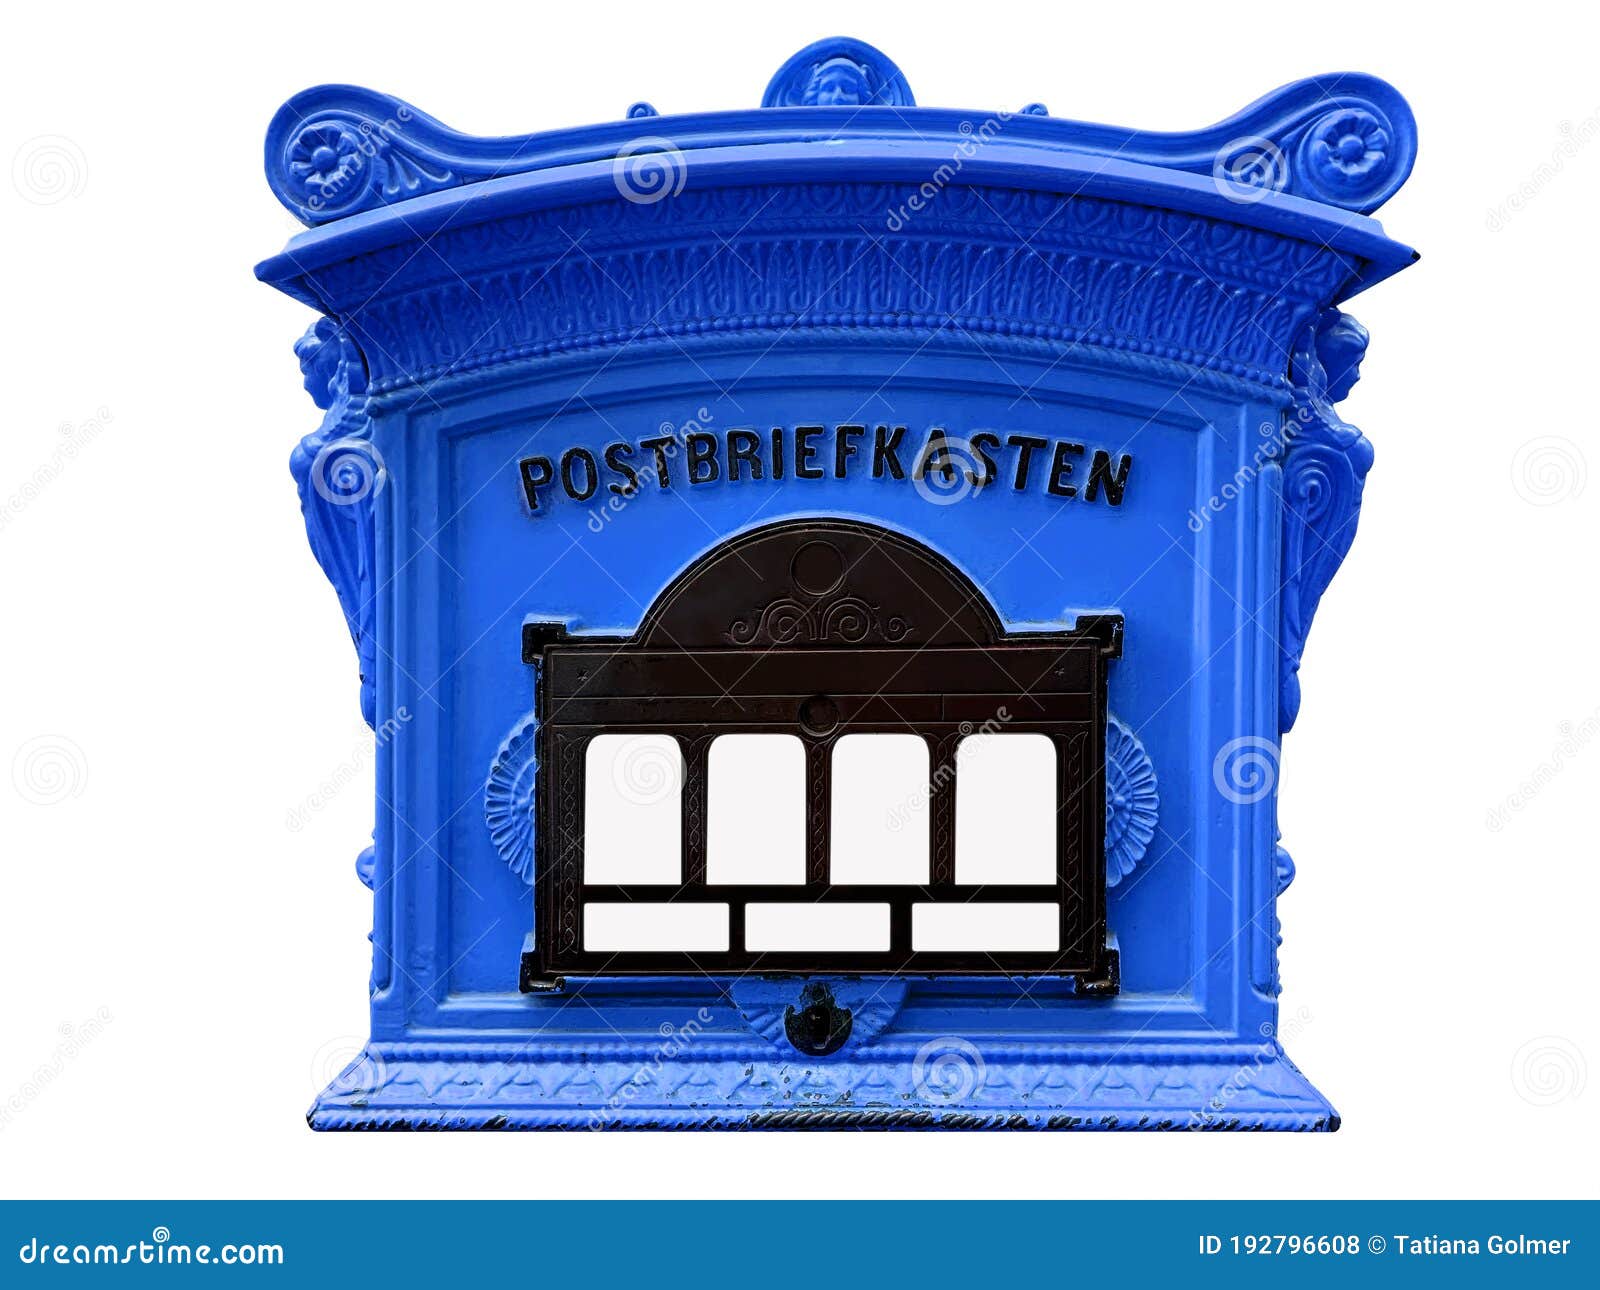 old blue mailbox for correspondence, tourist, historical concept, rarities of european cities